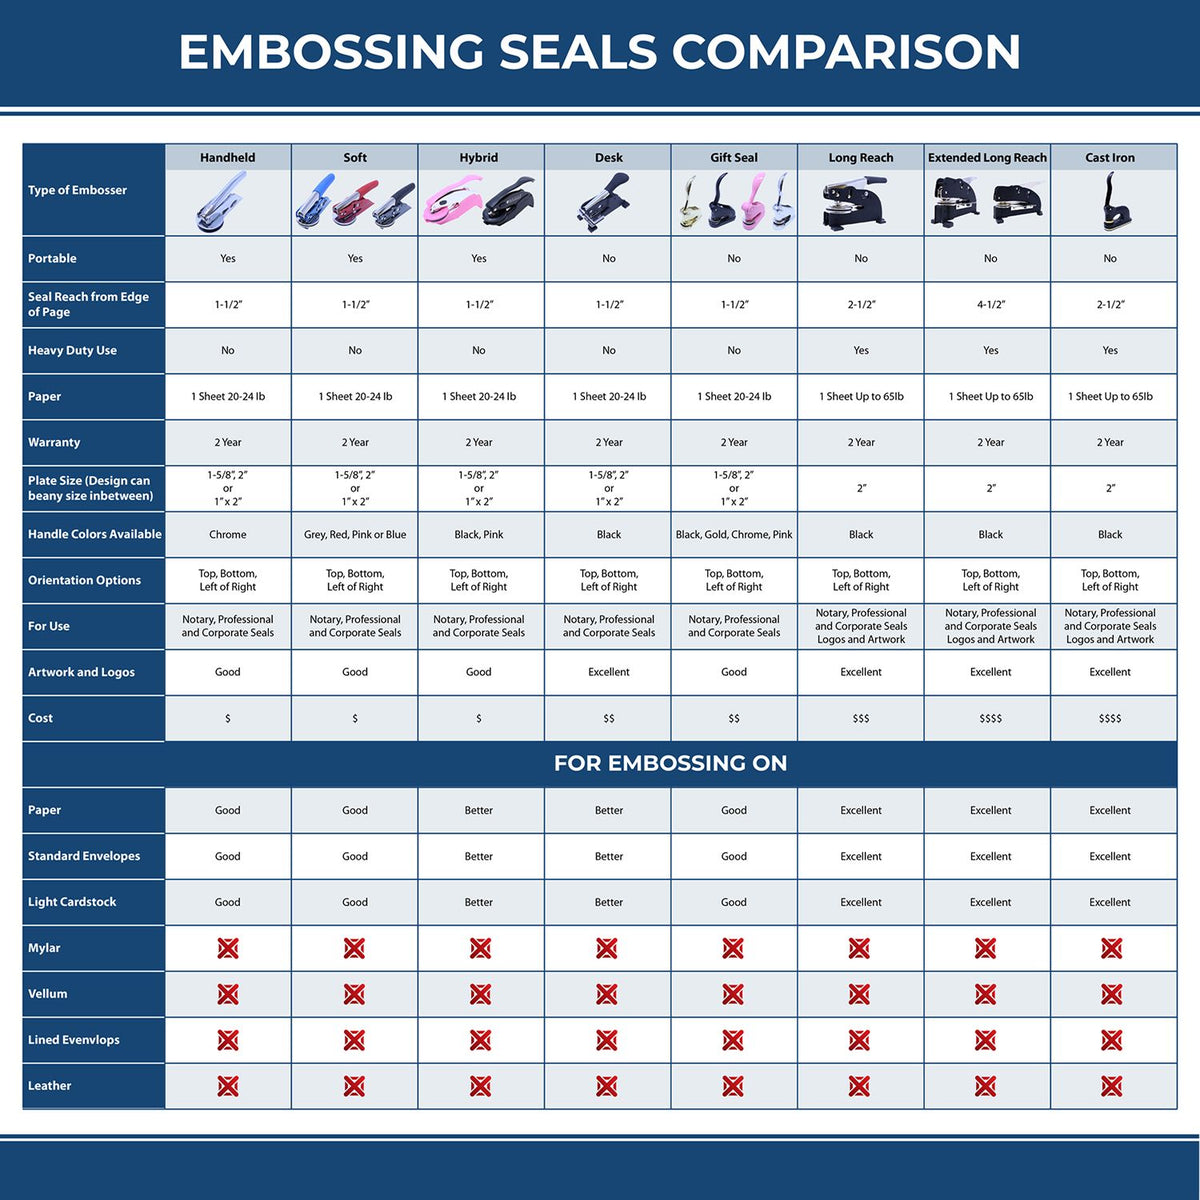 A comparison chart for the different types of mount models available for the Handheld South Carolina Professional Engineer Embosser.